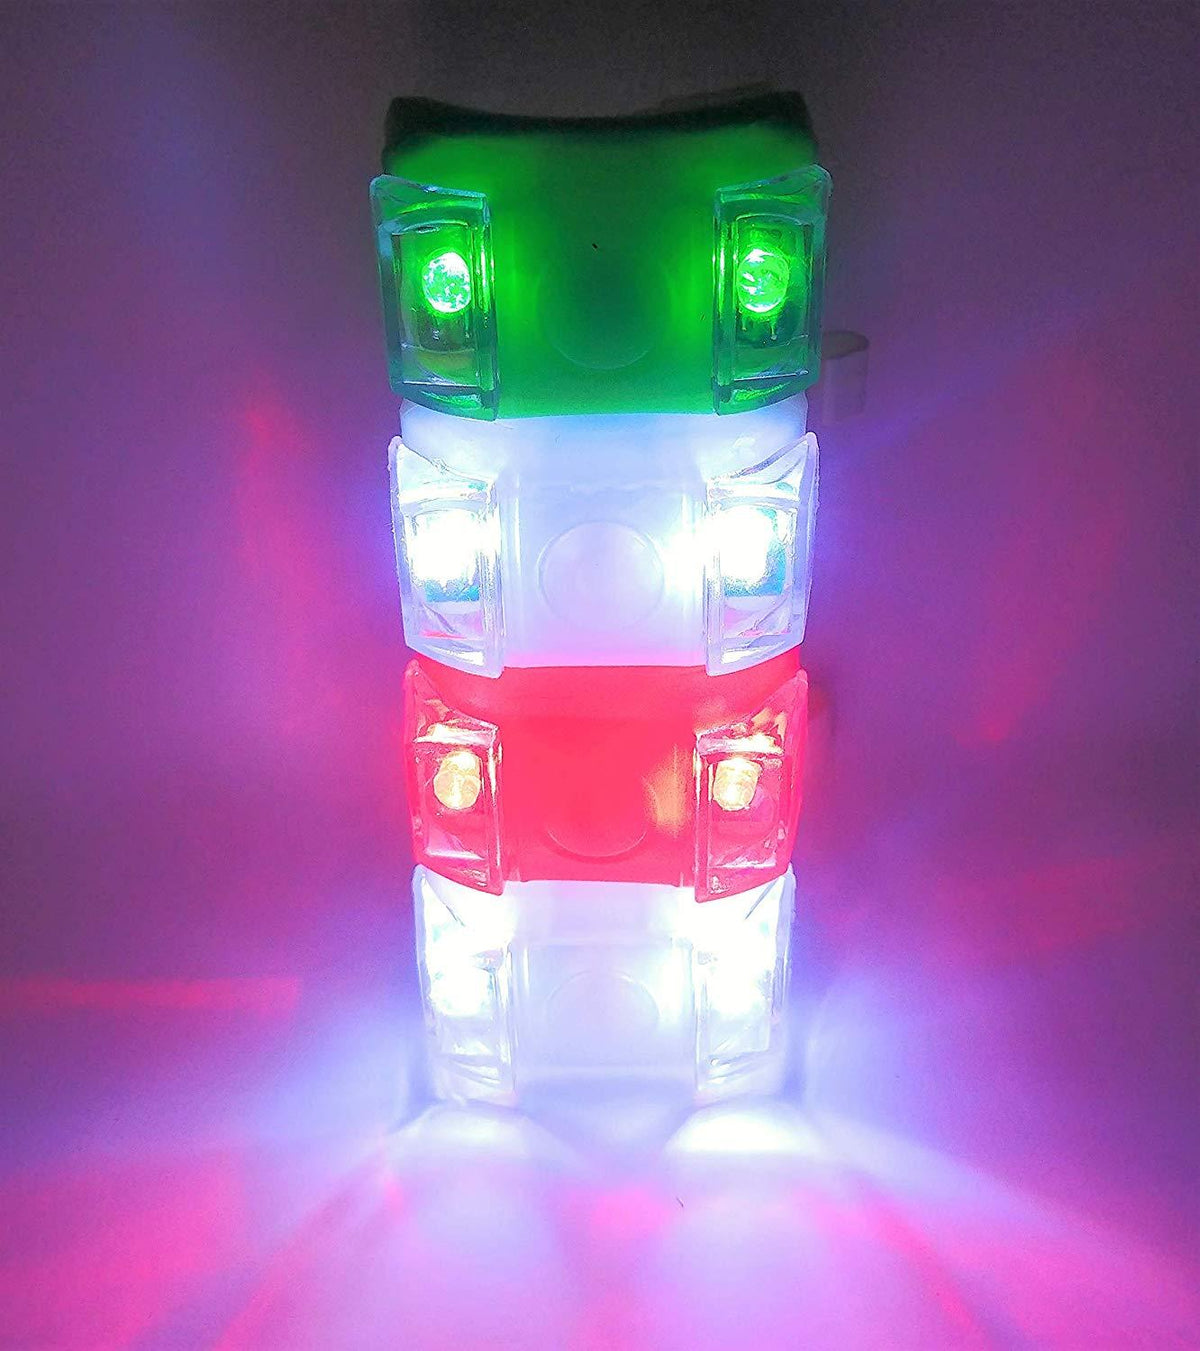 Green Blob Outdoors Navigation Boat Lights Sets Marine LED Portable Emergency Safety Waterproof (Choice of Red, Green, Blue, White) Boat Lights Green Blob Outdoors 